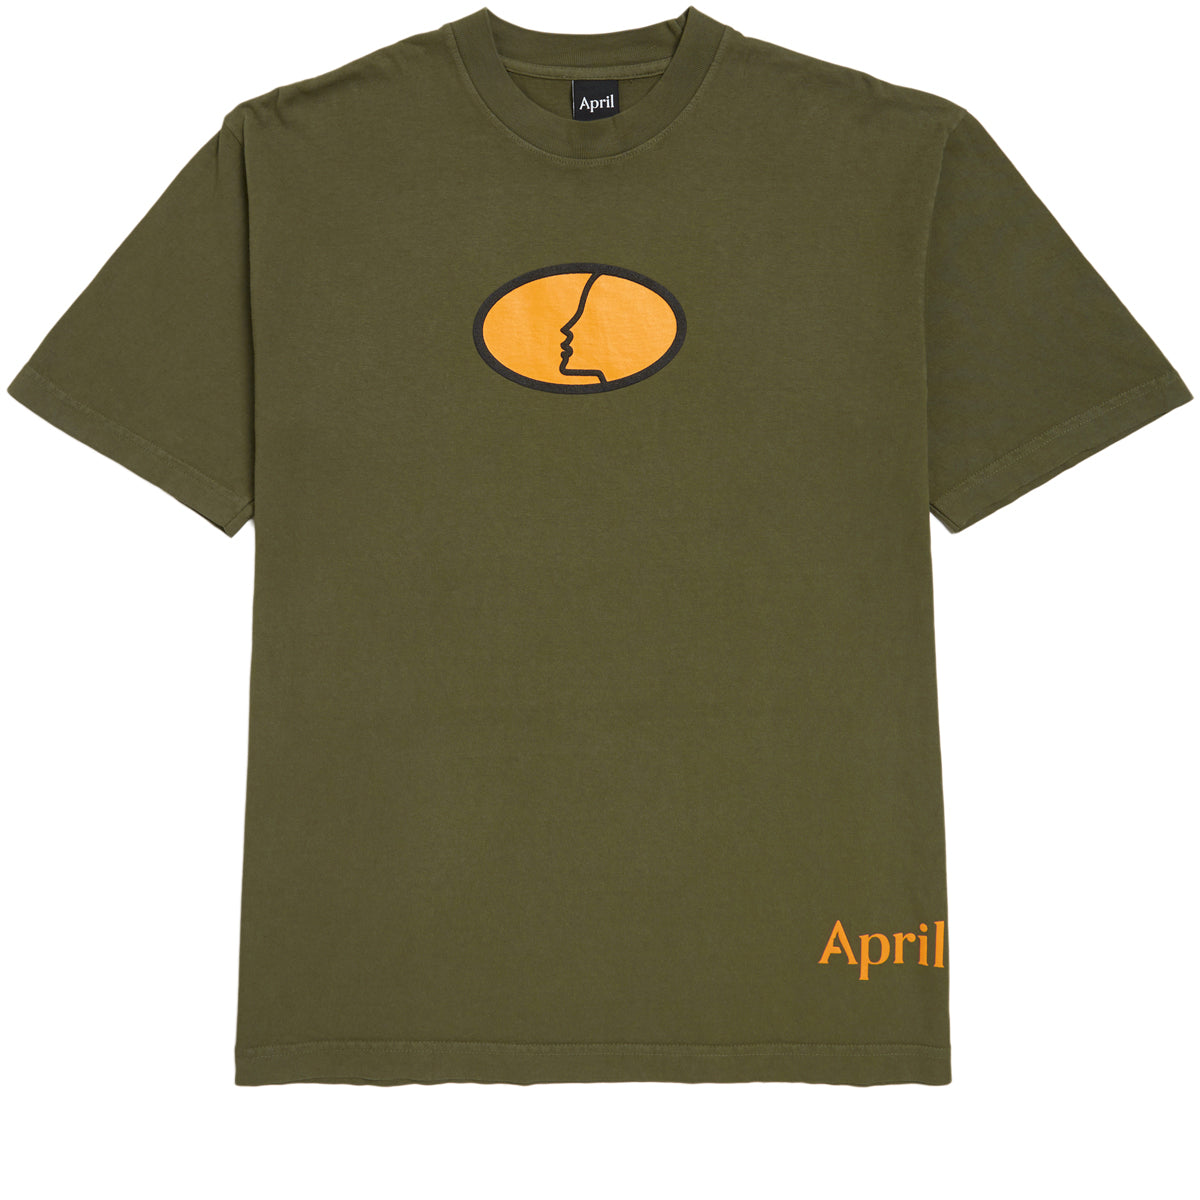 April The Face T-Shirt - Army Green image 1